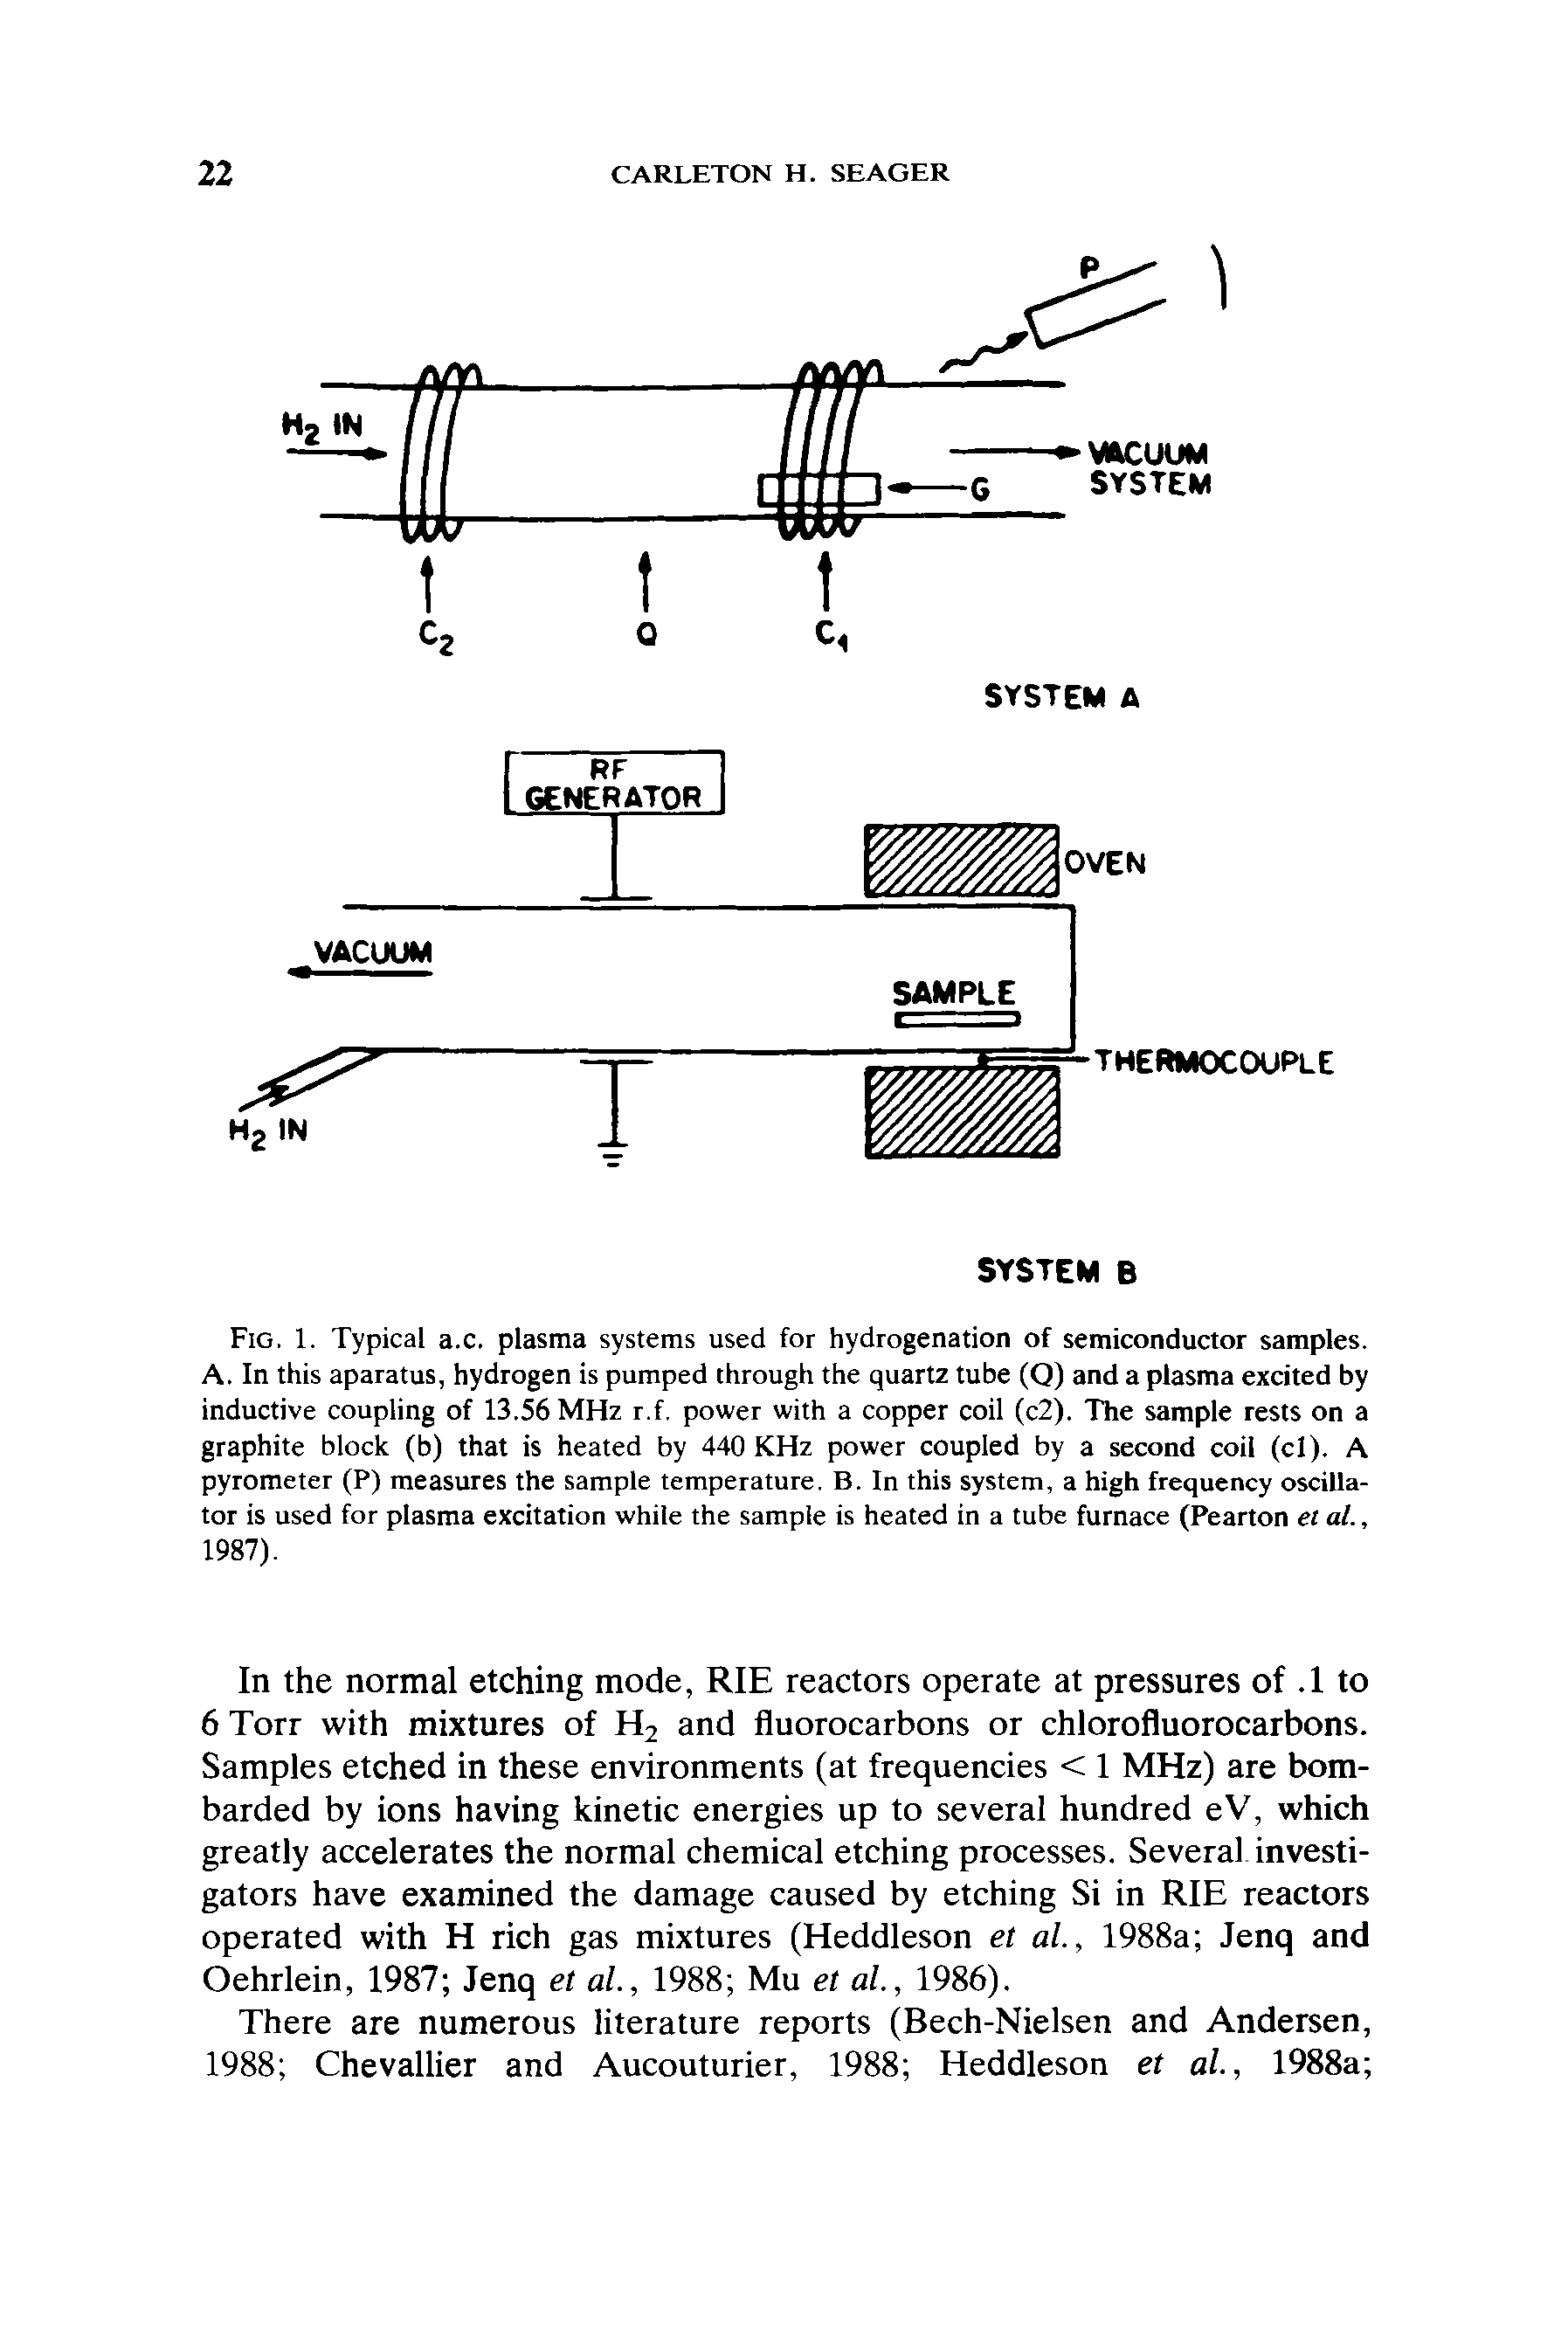 Fig. 1. Typical a.c. plasma systems used for hydrogenation of semiconductor samples. A. In this aparatus, hydrogen is pumped through the quartz tube (Q) and a plasma excited by inductive coupling of 13.56 MHz r.f. power with a copper coil (c2). The sample rests on a graphite block (b) that is heated by 440 KHz power coupled by a second coil (cl). A pyrometer (P) measures the sample temperature. B. In this system, a high frequency oscillator is used for plasma excitation while the sample is heated in a tube furnace (Pearton et al., 1987).